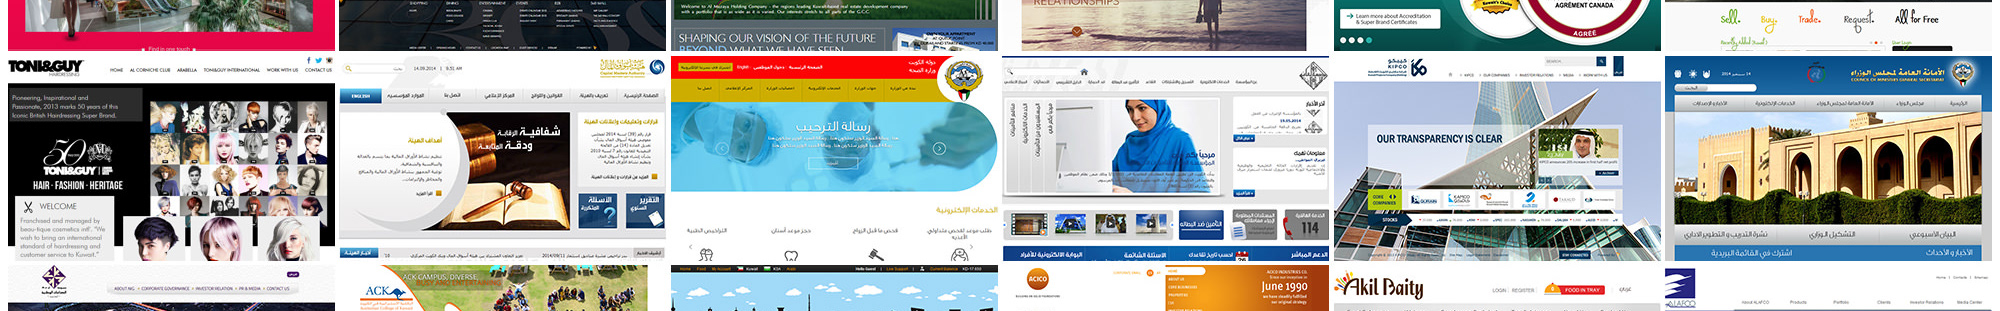 EST Solutions اي اس تي سوليوشنز's profile banner